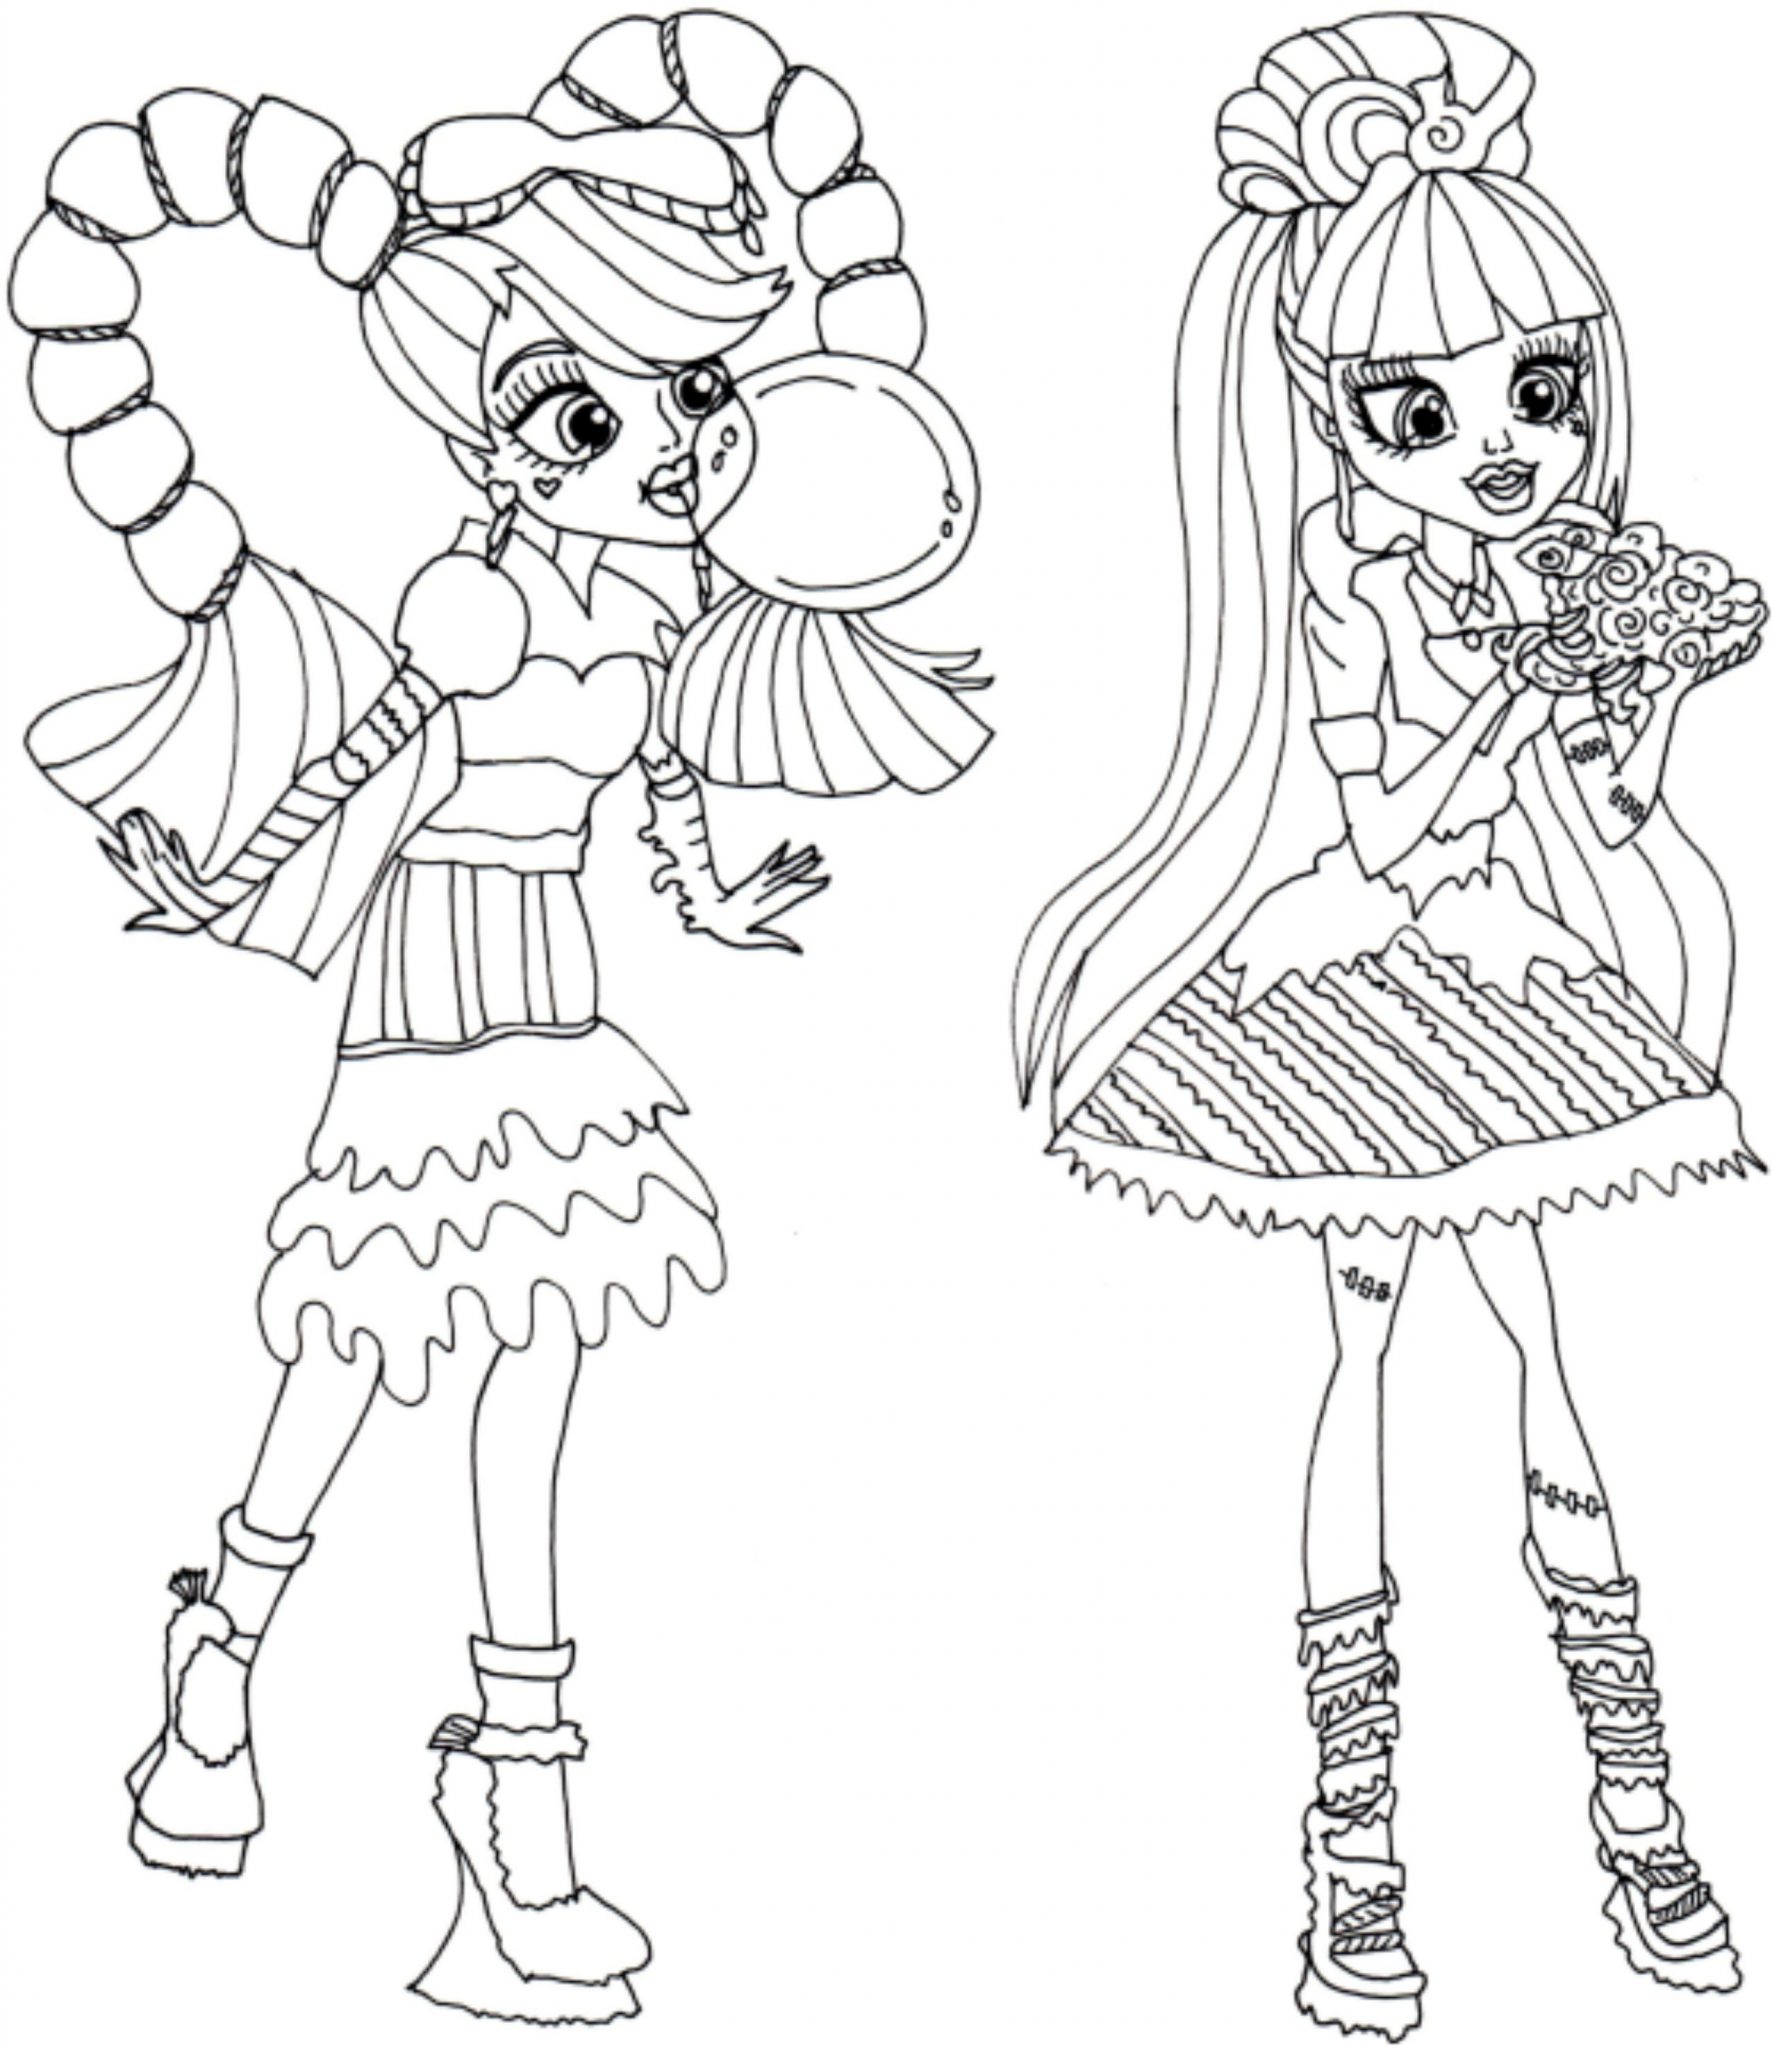 print-download-monster-high-coloring-pages-printable-for-your-kids